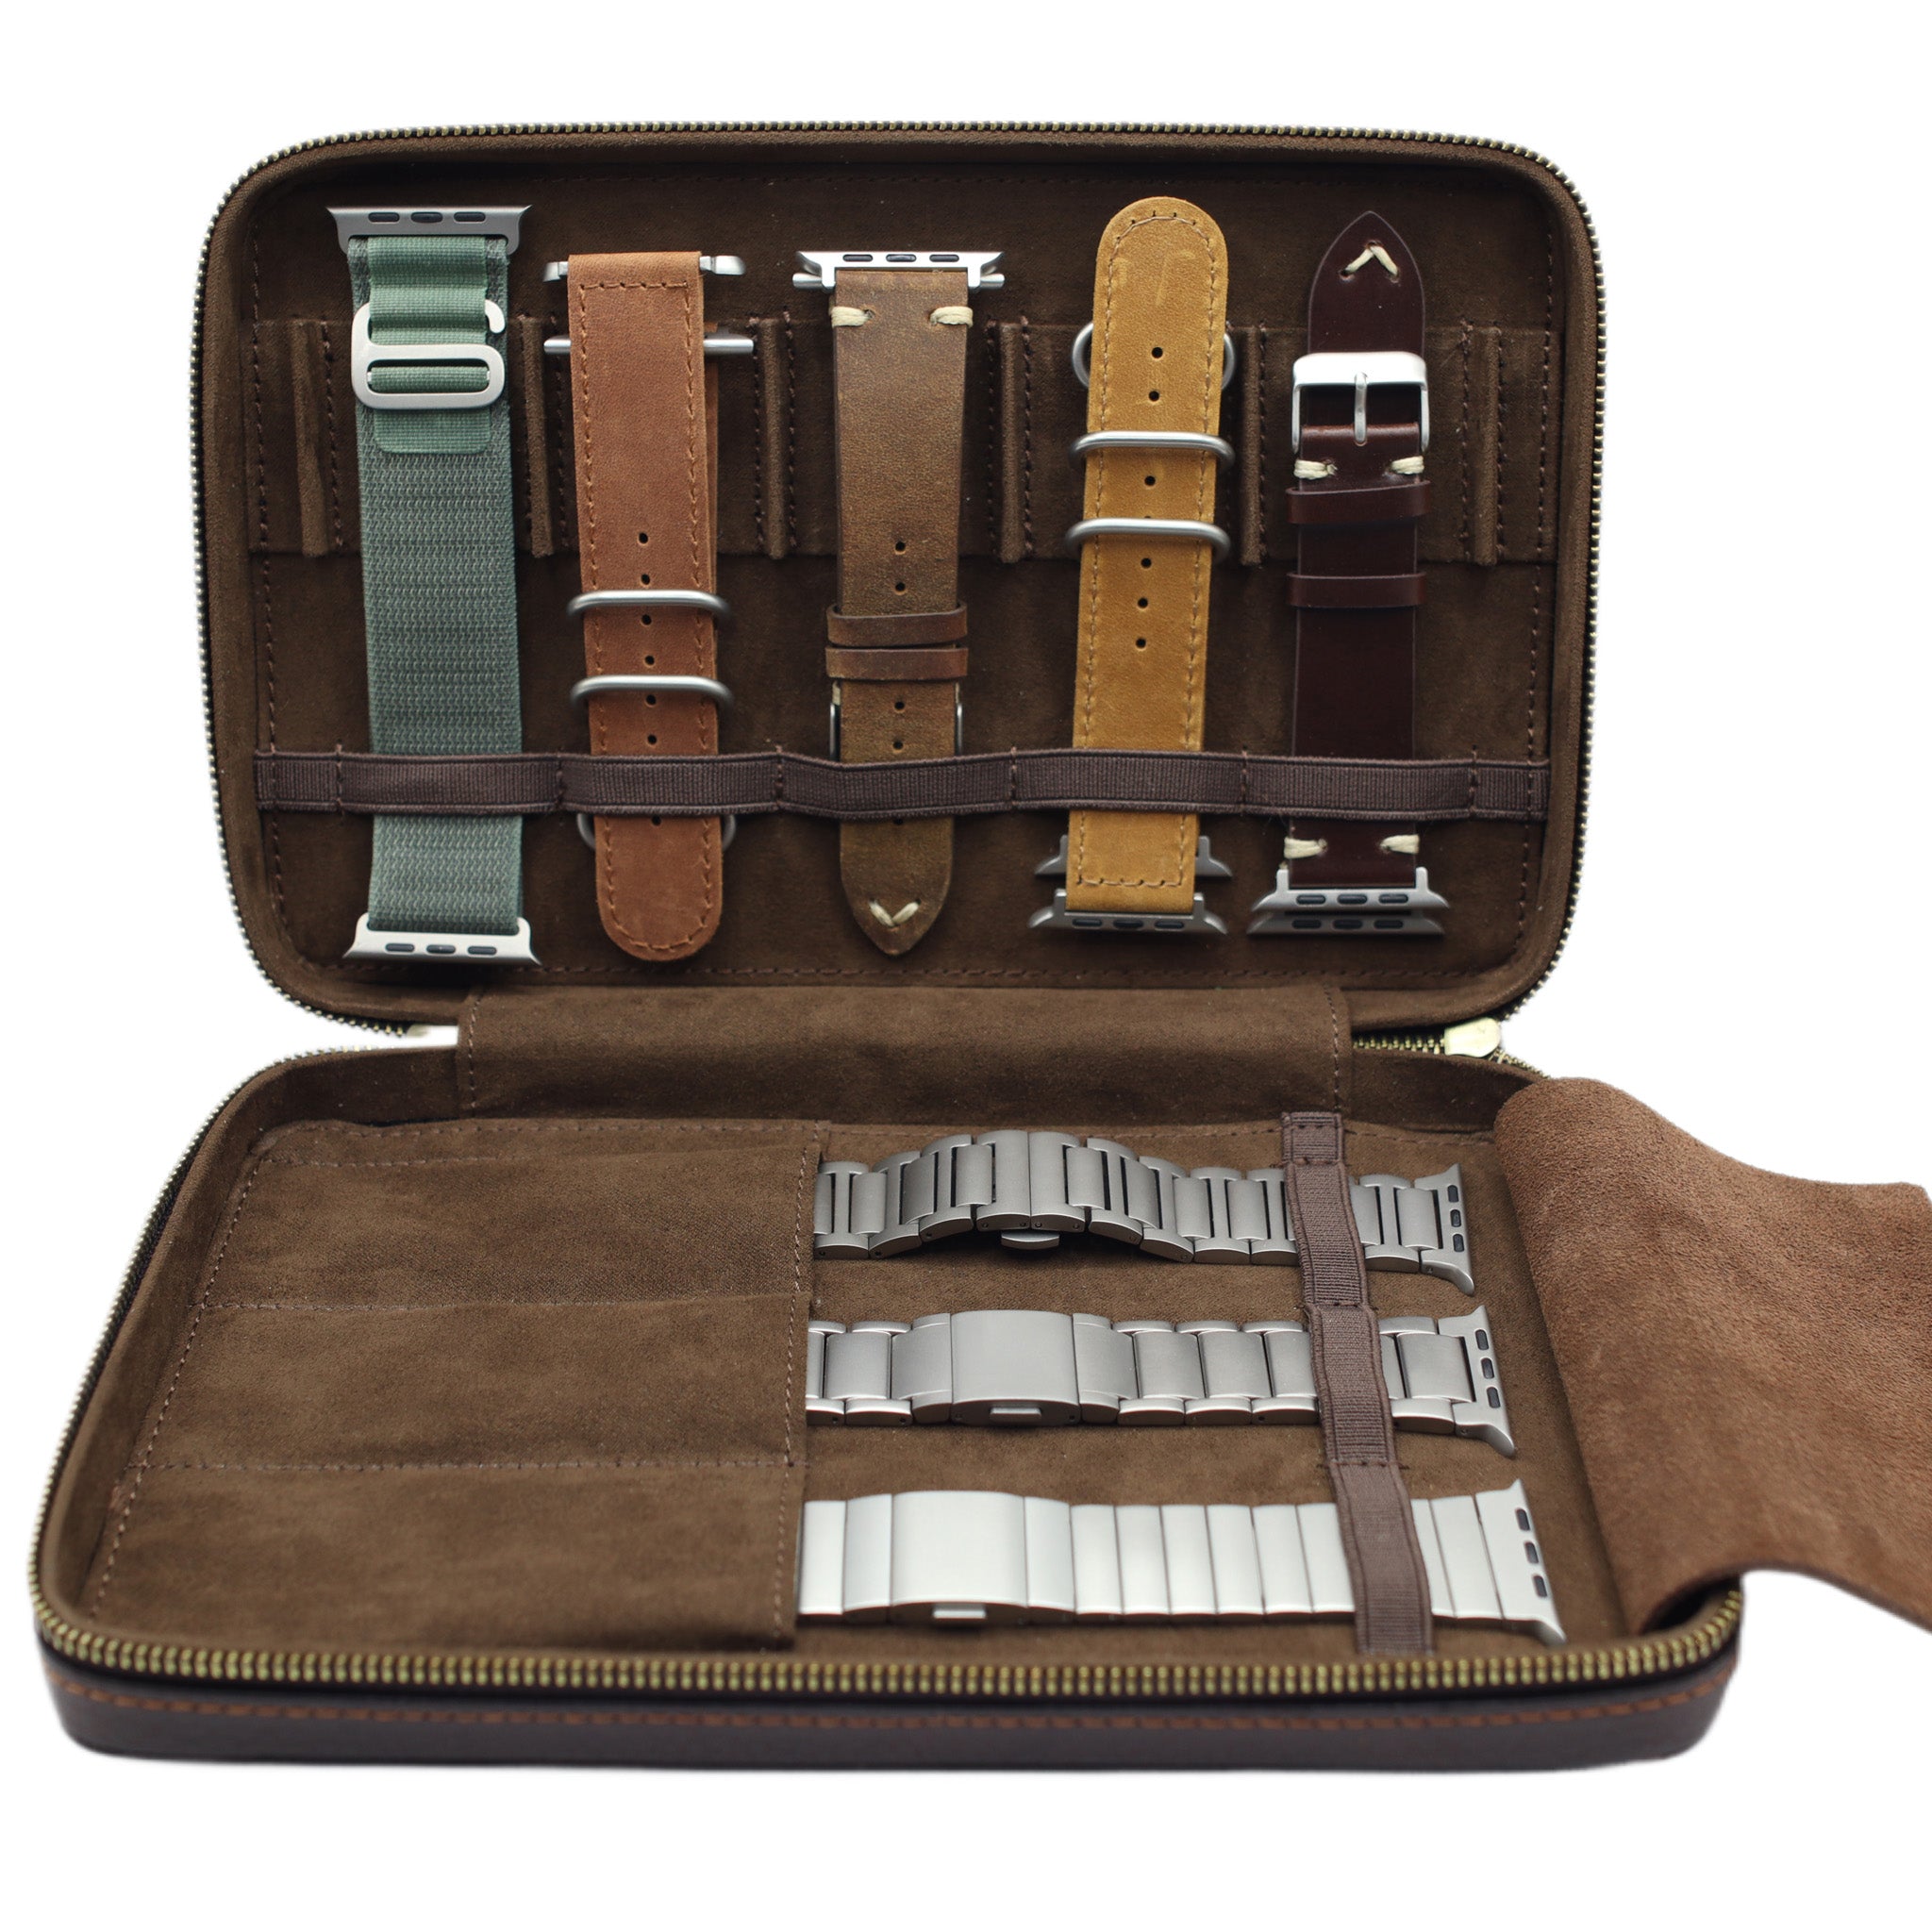 Leather Storage Case for Apple Watch Bands - Fits Metal Bands